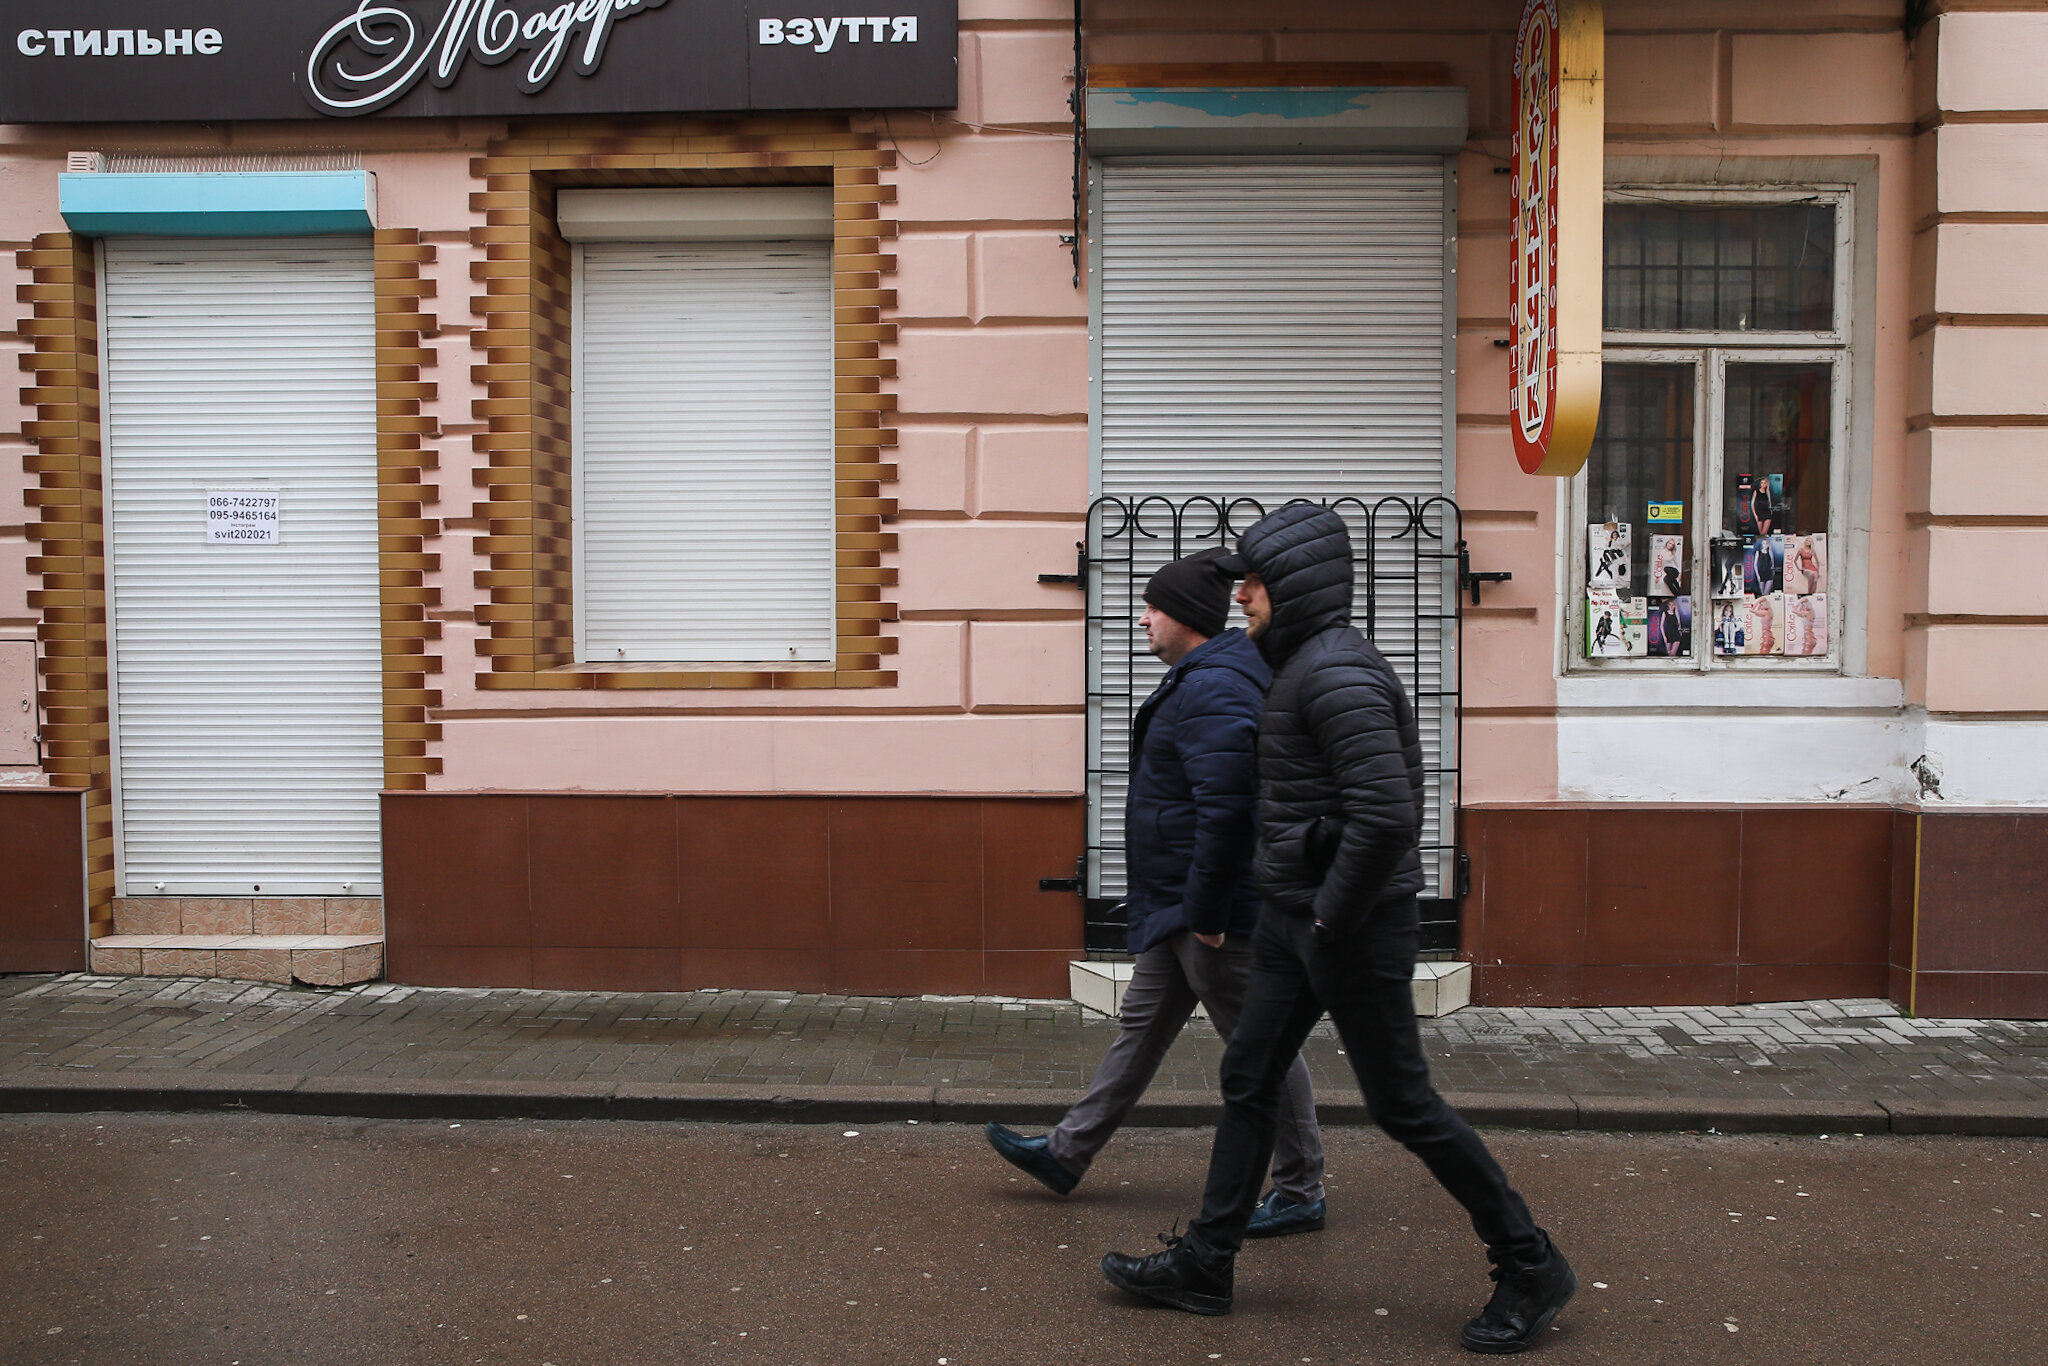 People walk along the streets of the central Kolomyia in Ivano-Frankivsk Oblast on March 16, 2021. All non-essential shops and businesses are closed. 